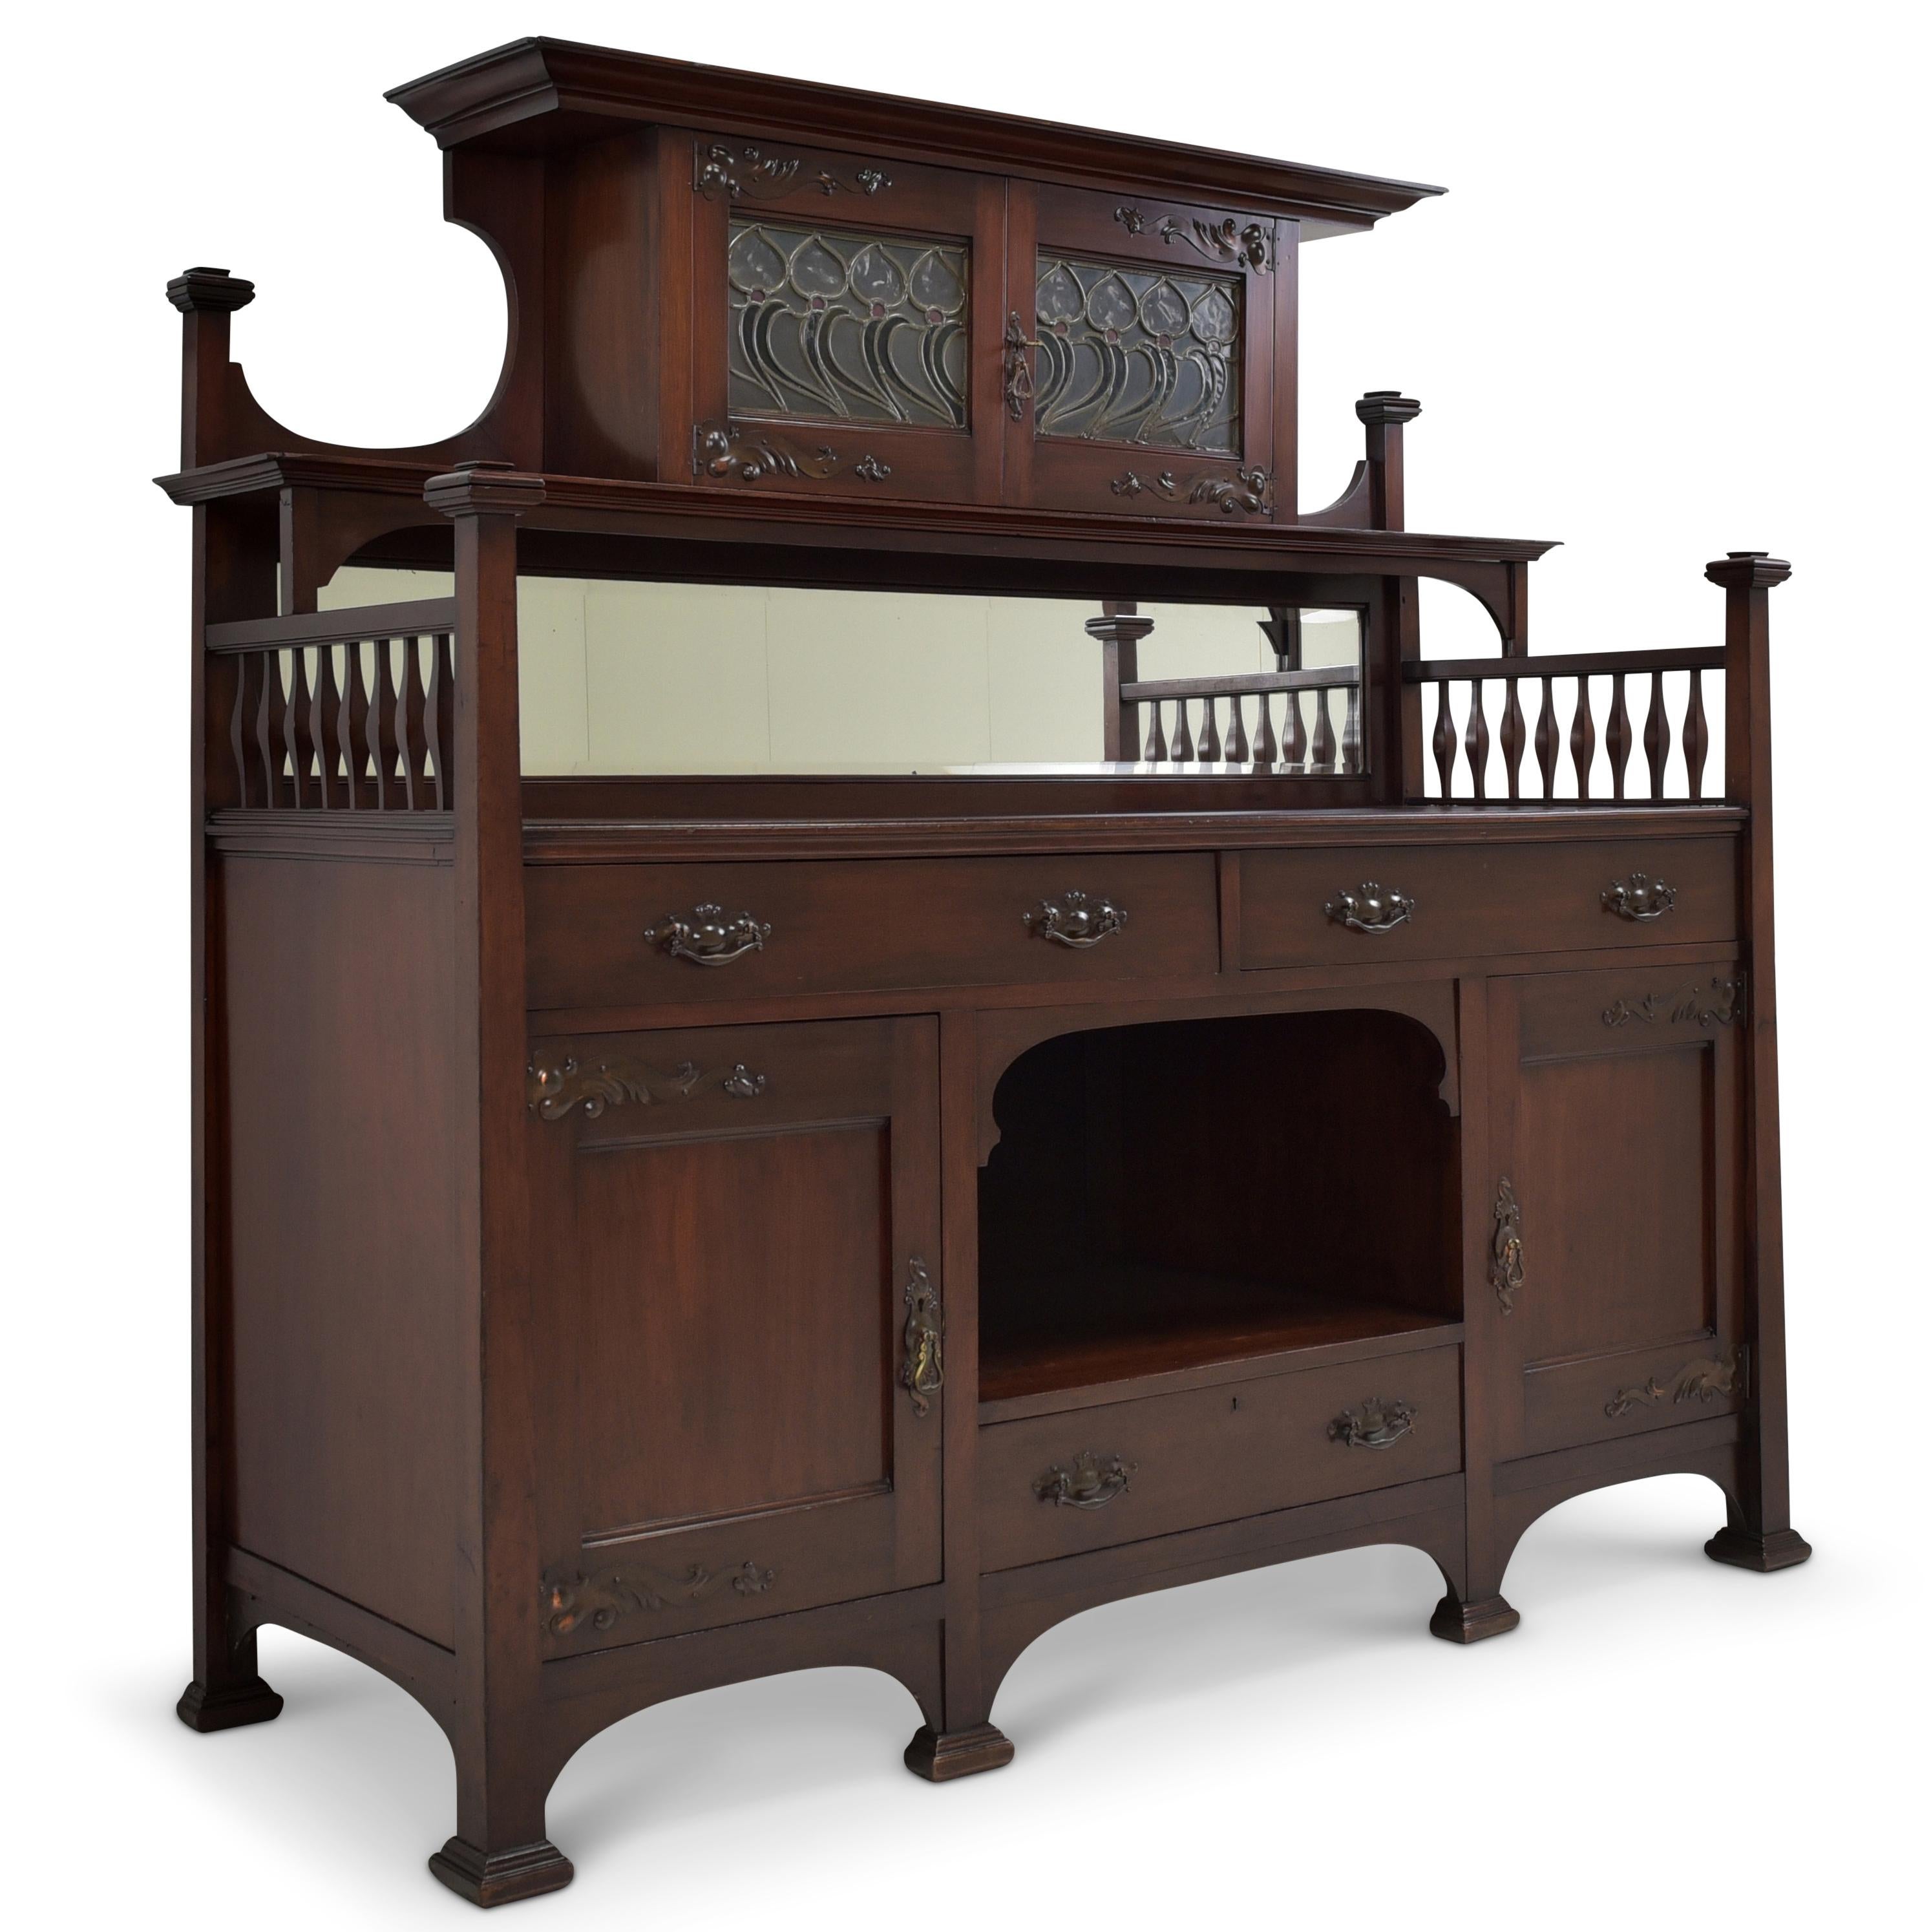 Buffet cabinet restored Art Nouveau circa 1900 mahogany credenza sideboard

Features:
Wide base with low, tapered top
Very high quality processing
Drawers pronged
High-quality original fittings
Original Art Nouveau stained glass with a few